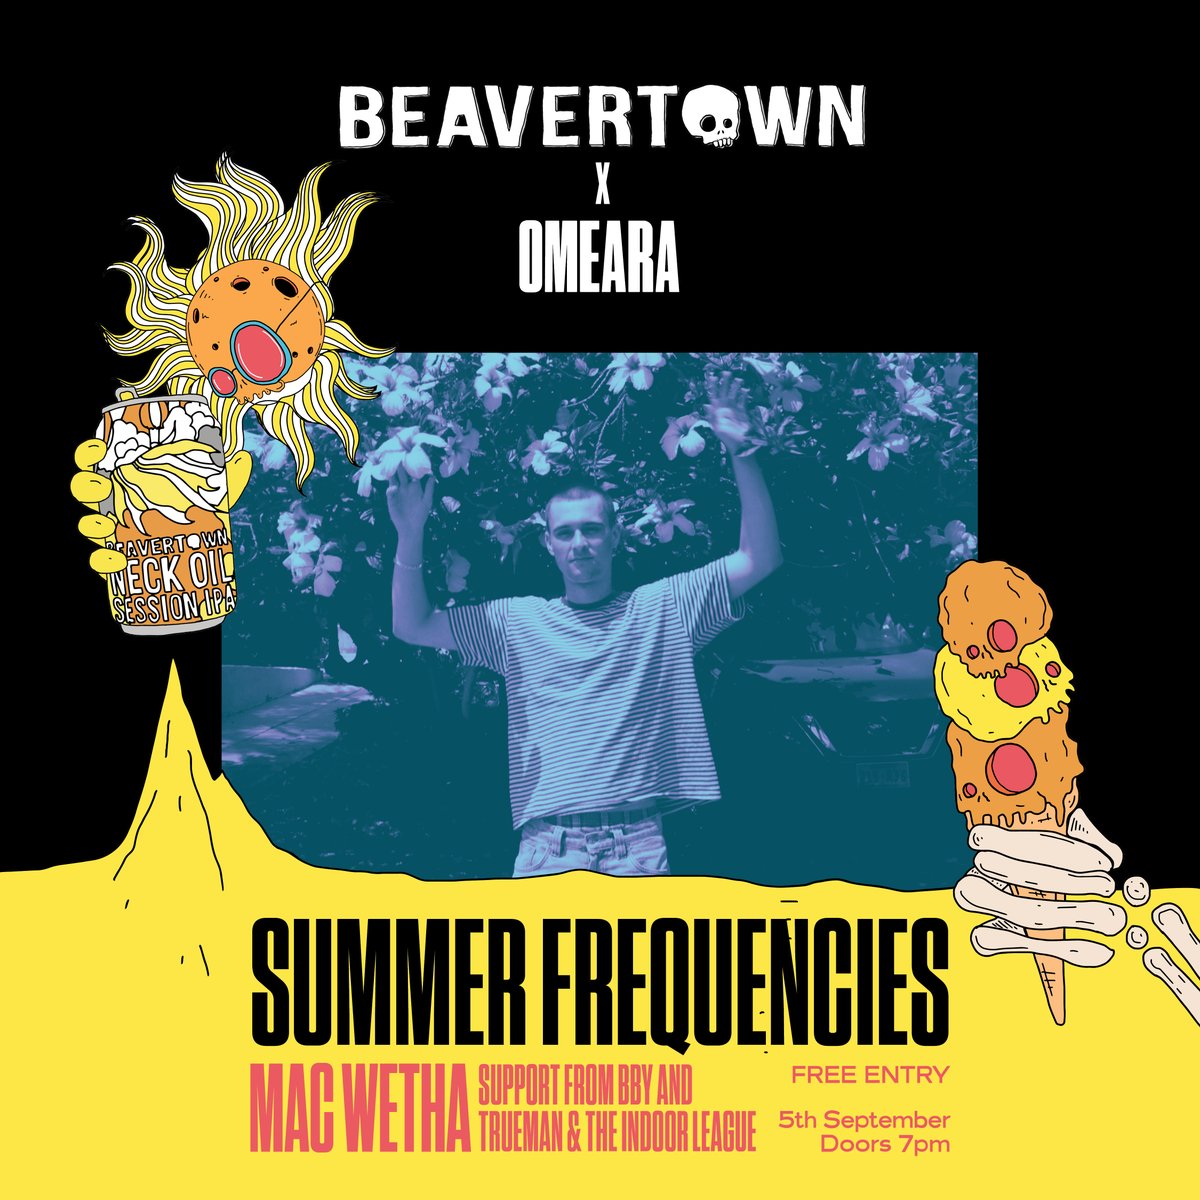 .@beavertownbeer is back on 5th September! Another huge lineup for our fourth FREE ENTRY party, this time bringing South London producer and @NINE8COLLECTIVE member Mac Wetha to OMEARA with support from Bby and @theindoorleague. FREE TICKETS: wwwomearalondon.com/event/beaverto…